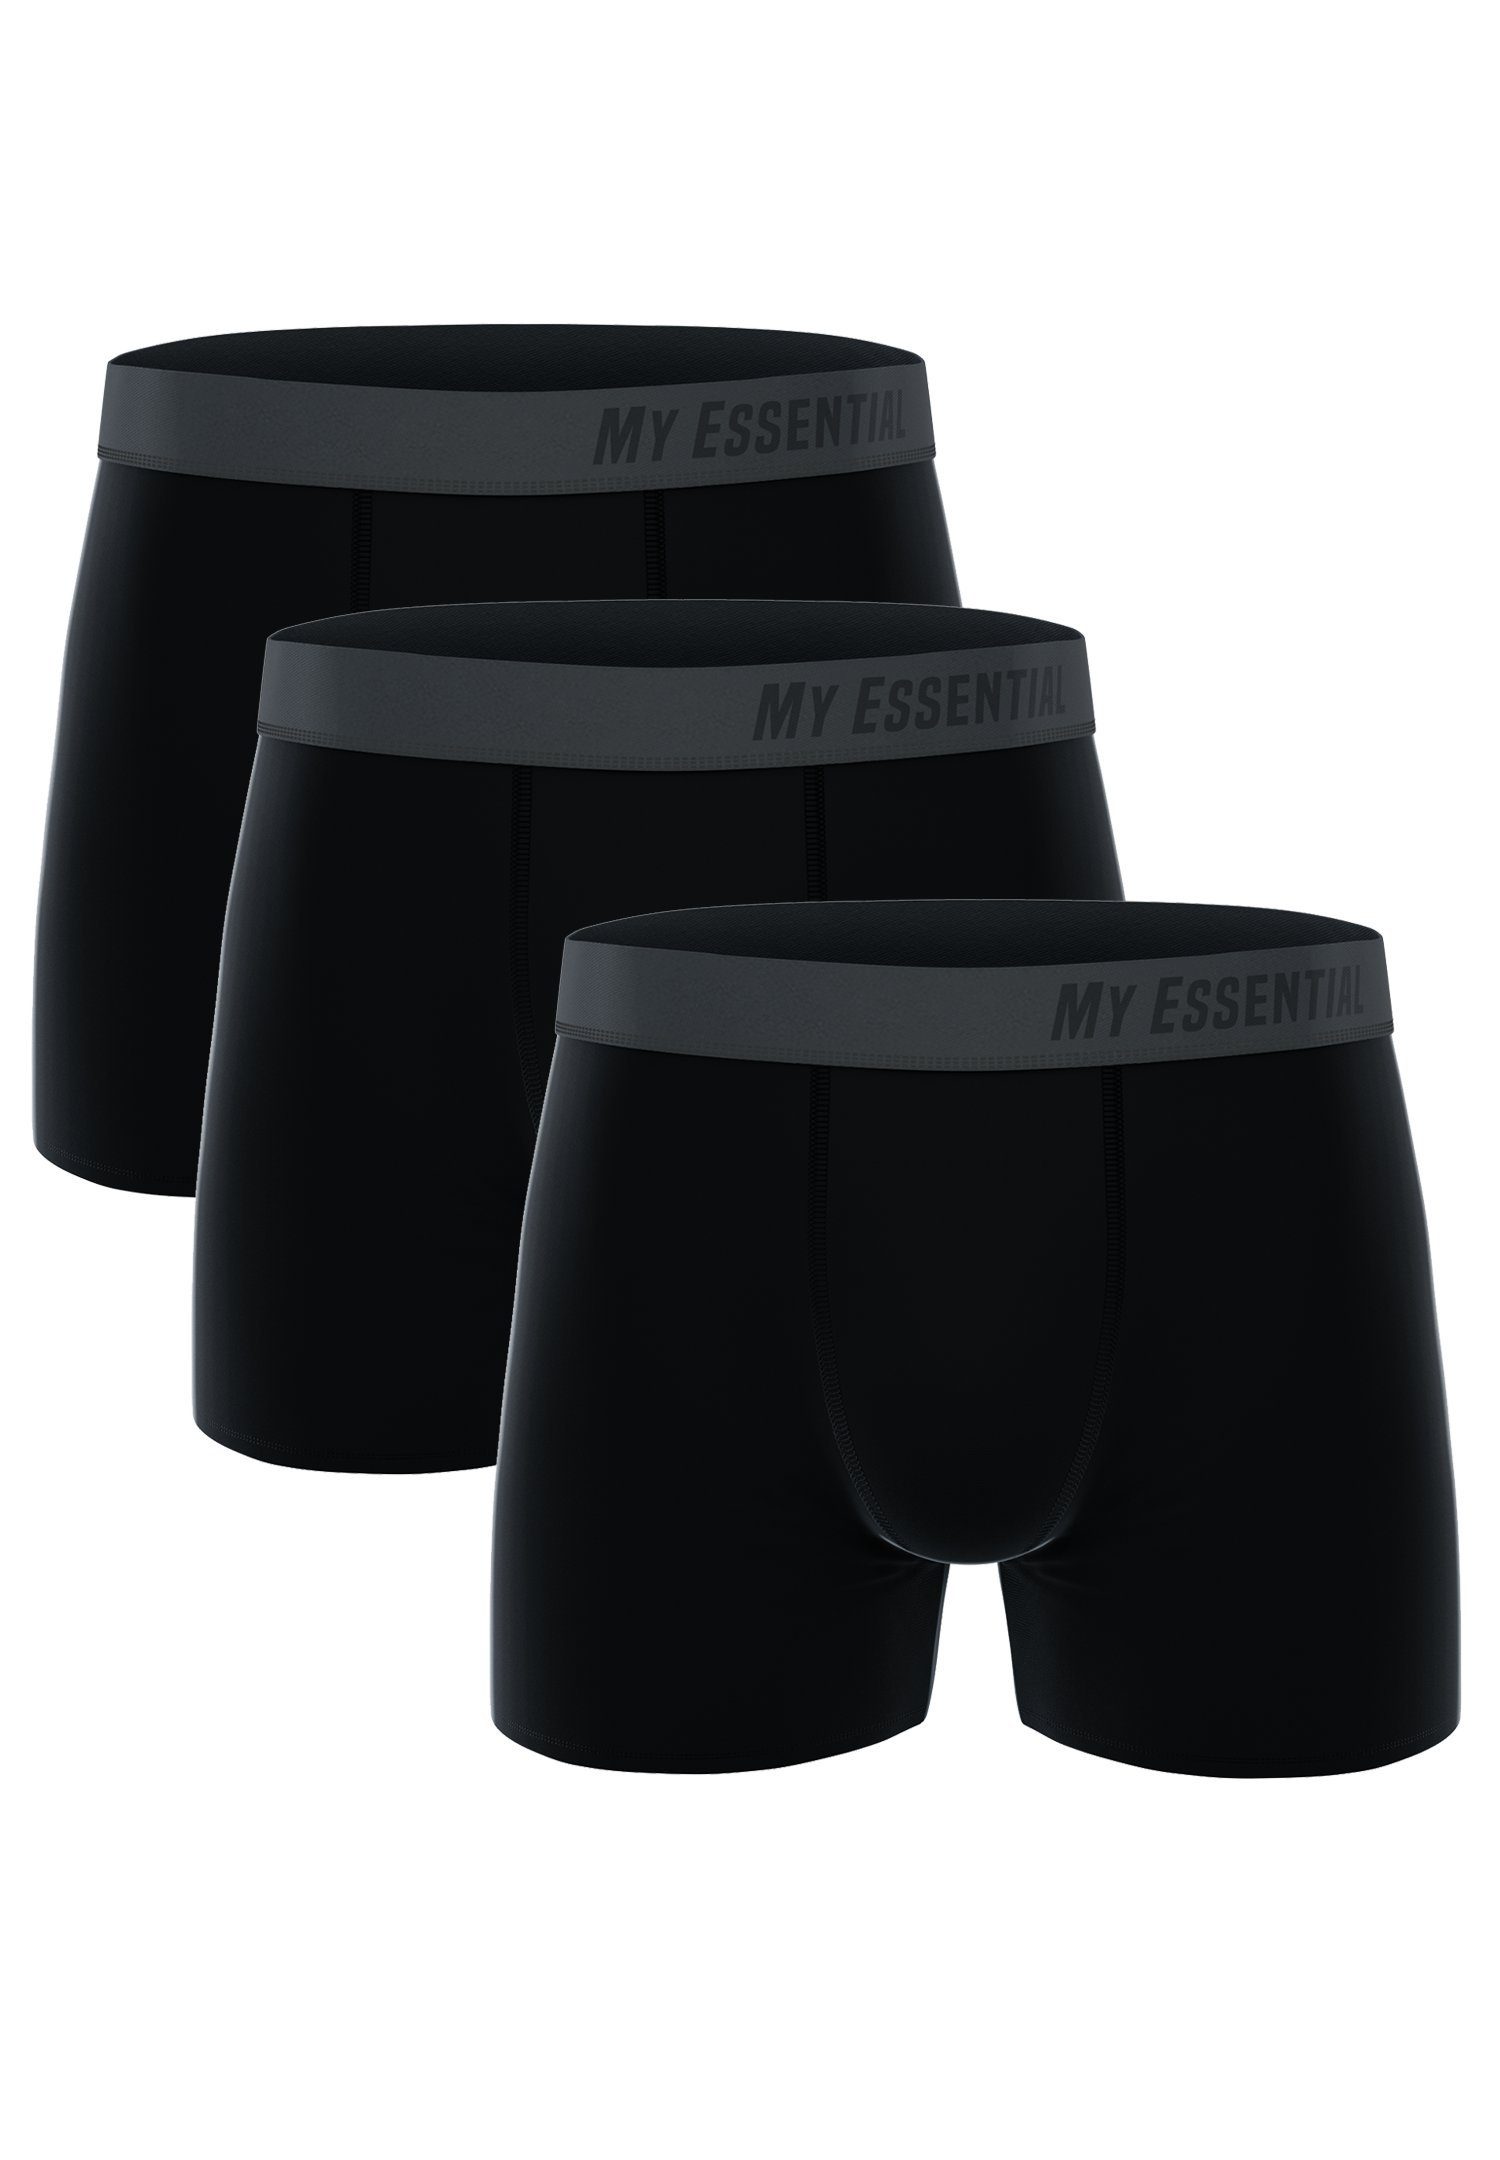 My Essential Clothing Boxershorts My Essential 3 Pack Boxers Cotton Bio (Spar-Pack, 3-St., 3er-Pack) Black